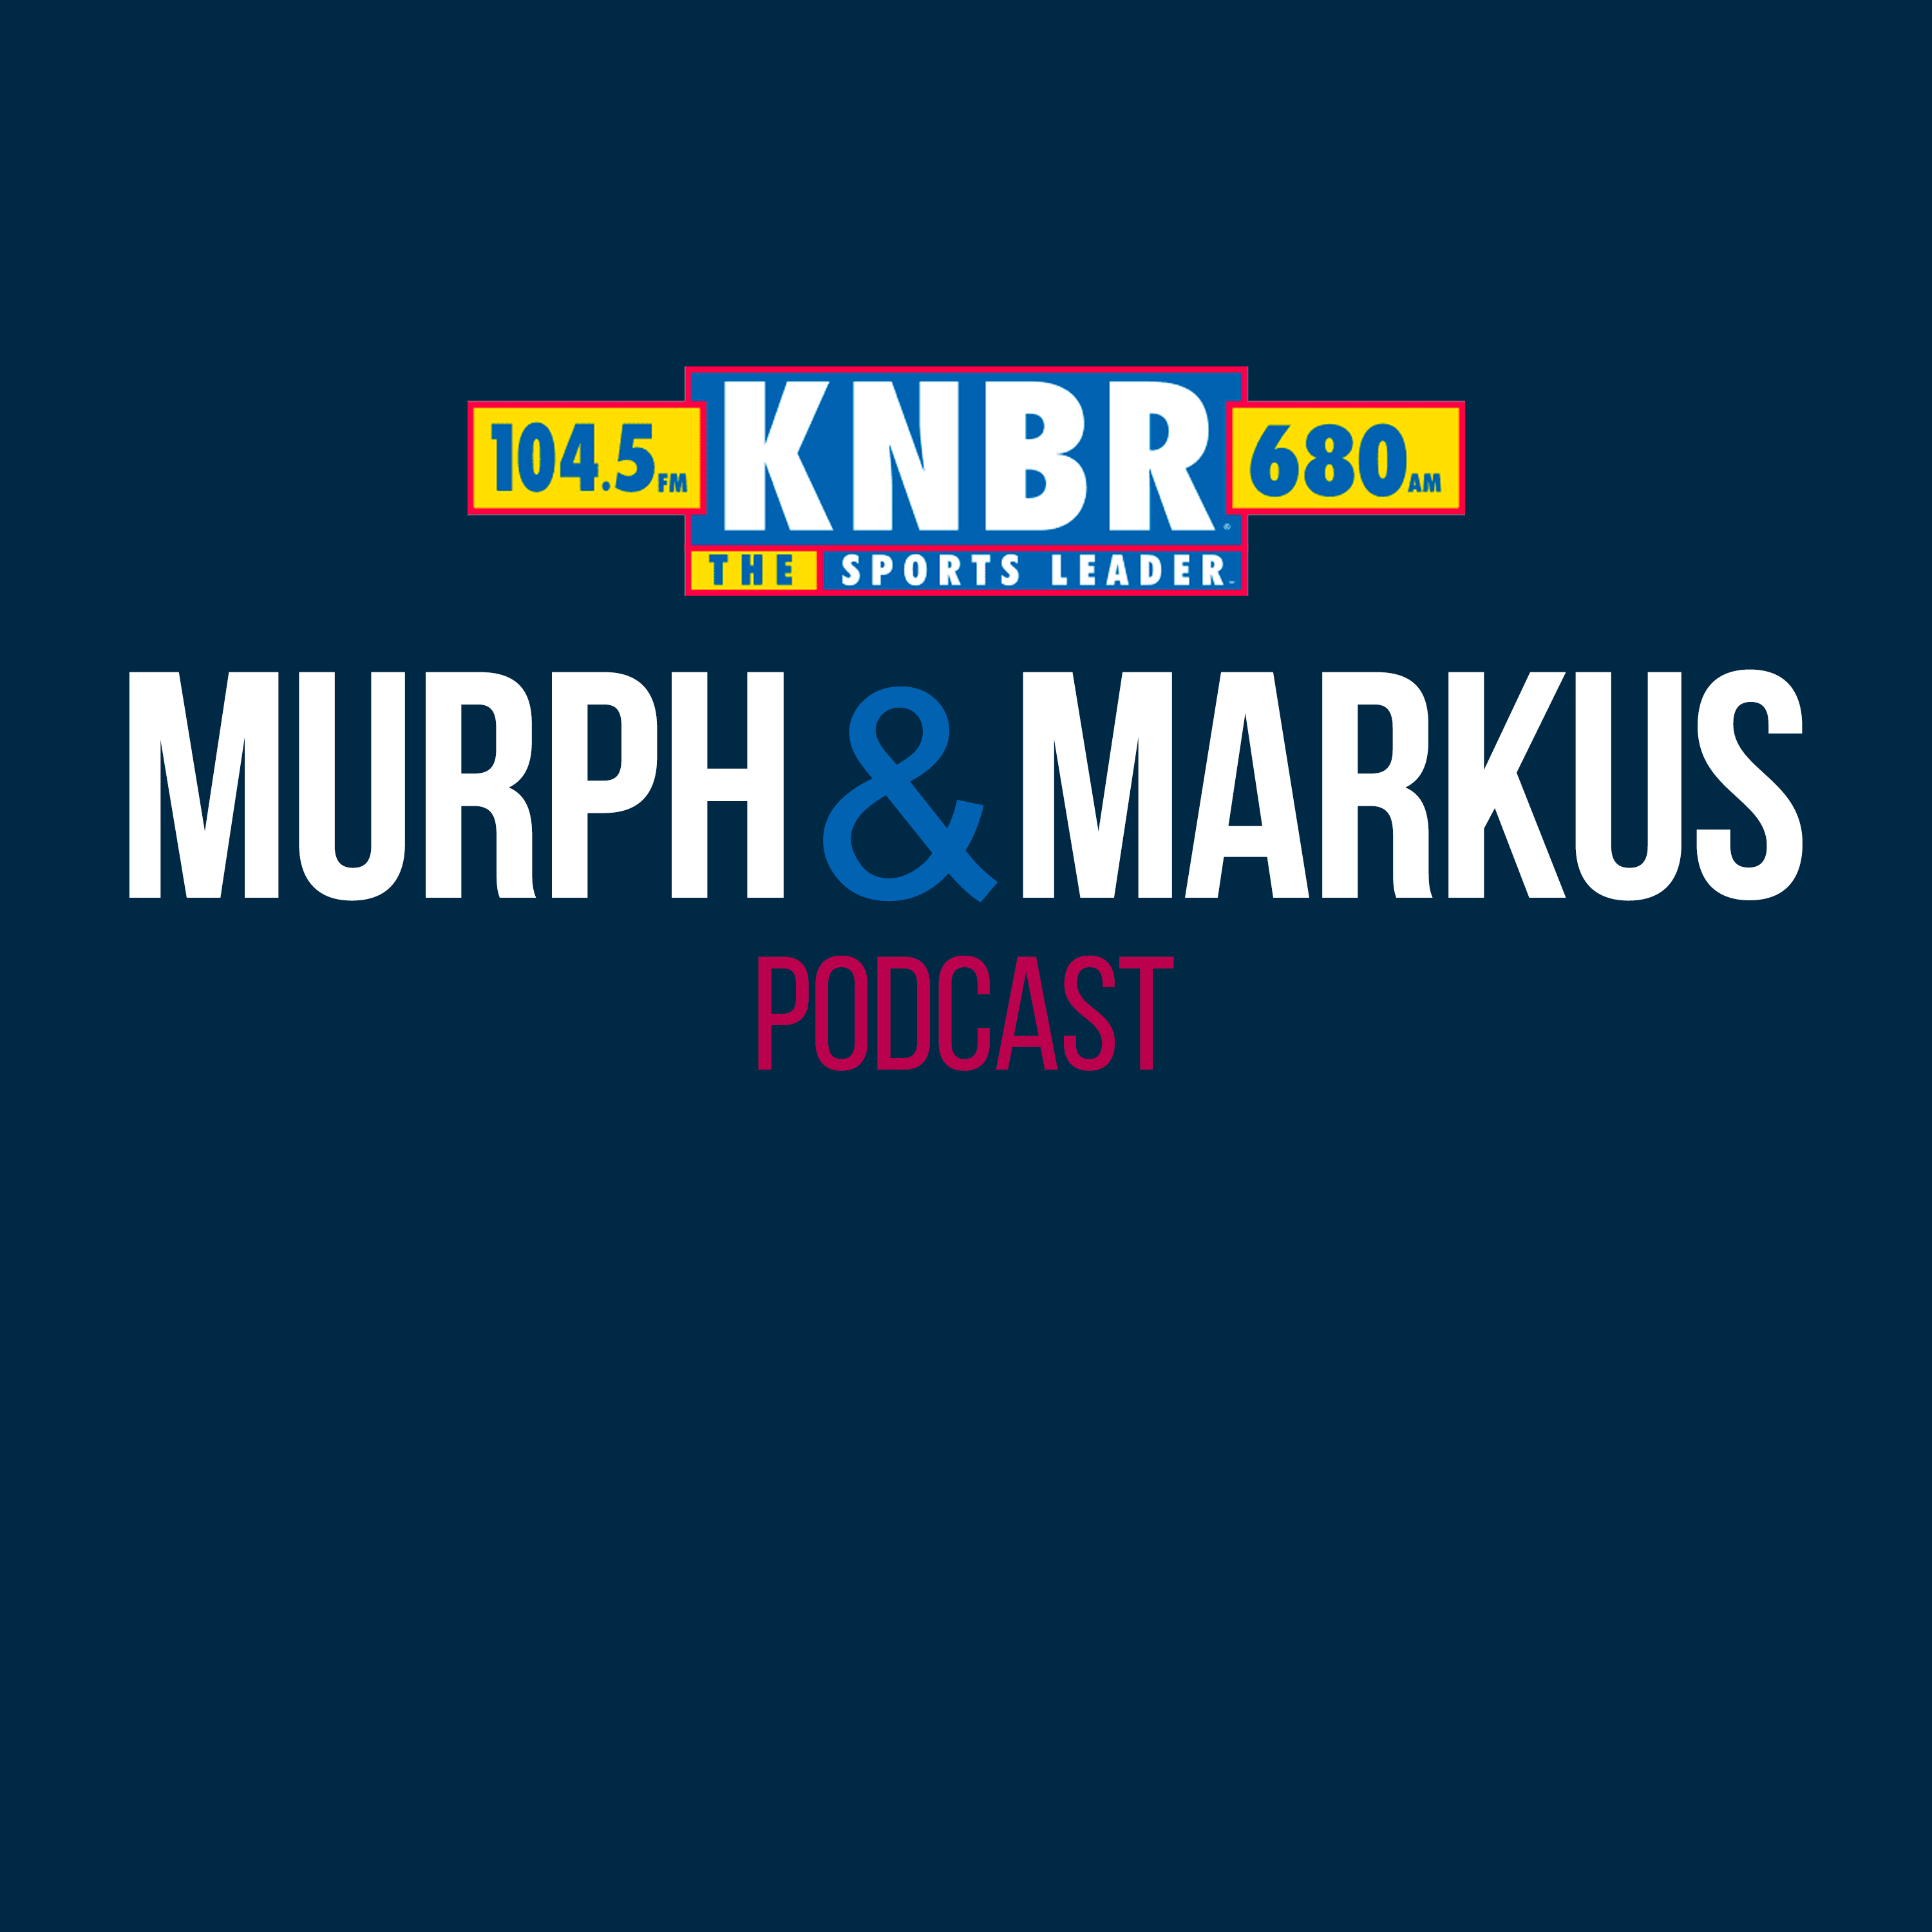 5-22 Hour 2: Murph & Markus debate what Giant deserves to be blamed for blowing a 4-run lead, talk to Mike Krukow, and then talk to Leonard Floyd in the Big Hit